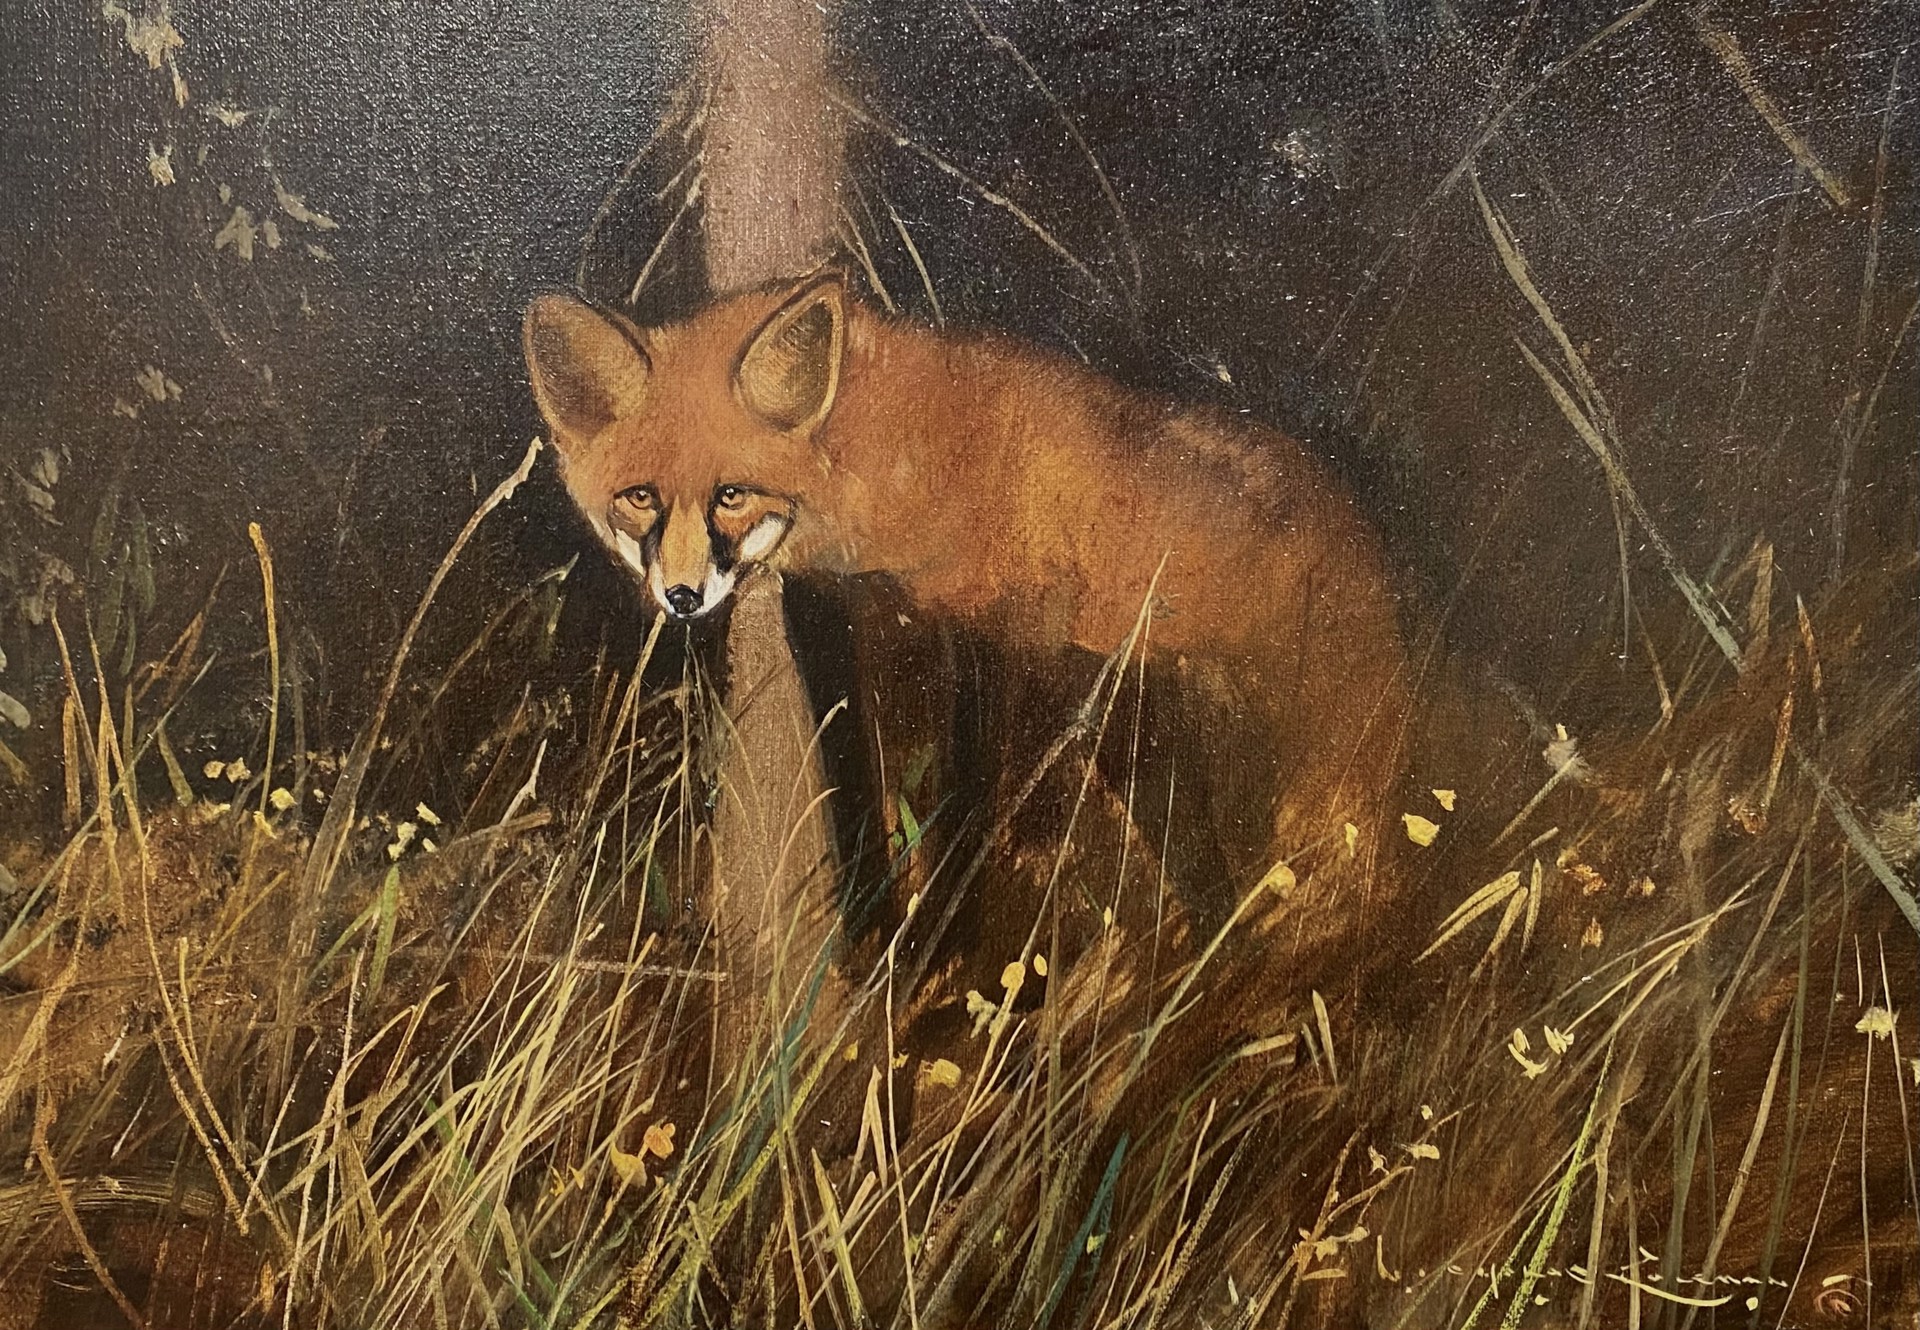 THE RED FOX by Nicholas Coleman